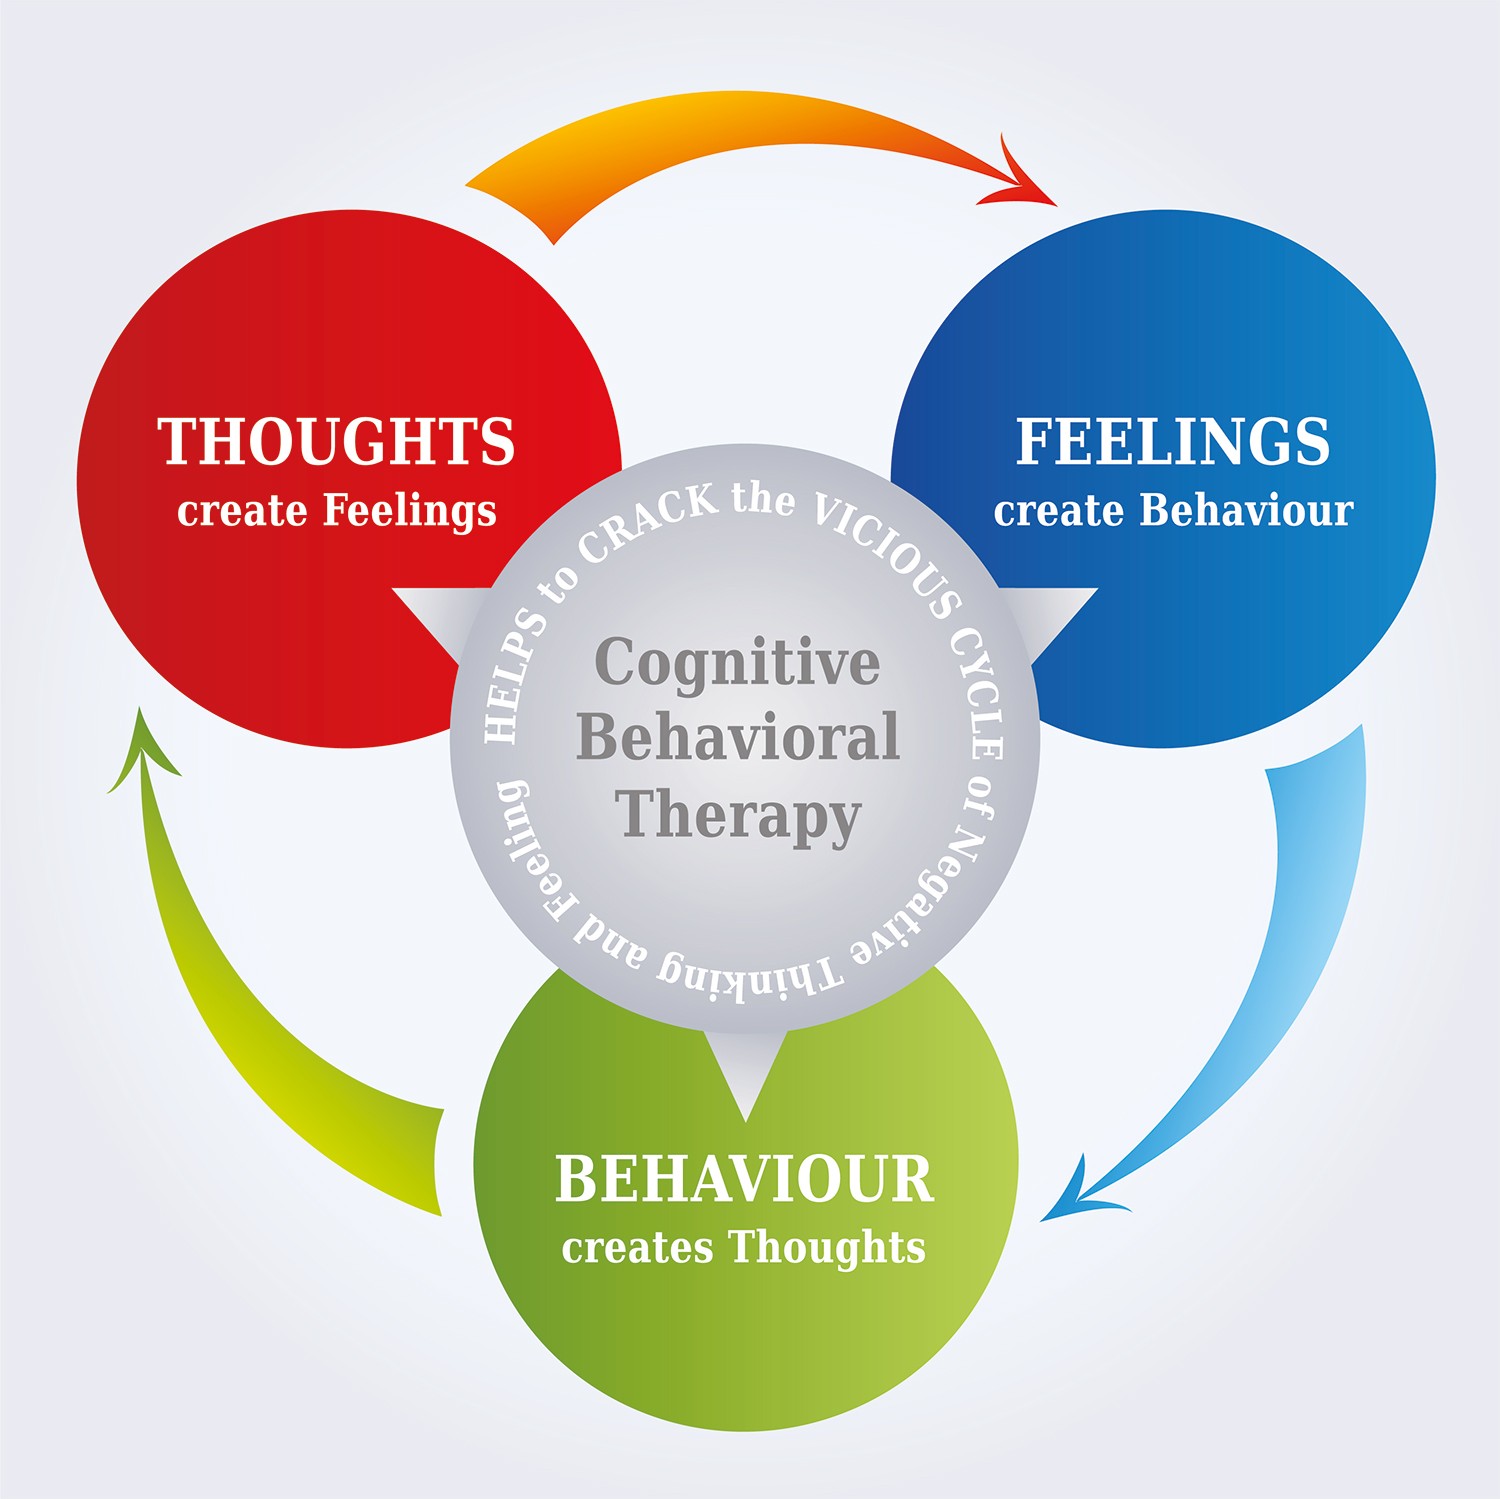 Cognitive Behavior Therapy (CBT) helps people to recognize how what they think impacts how they feel and what they do.